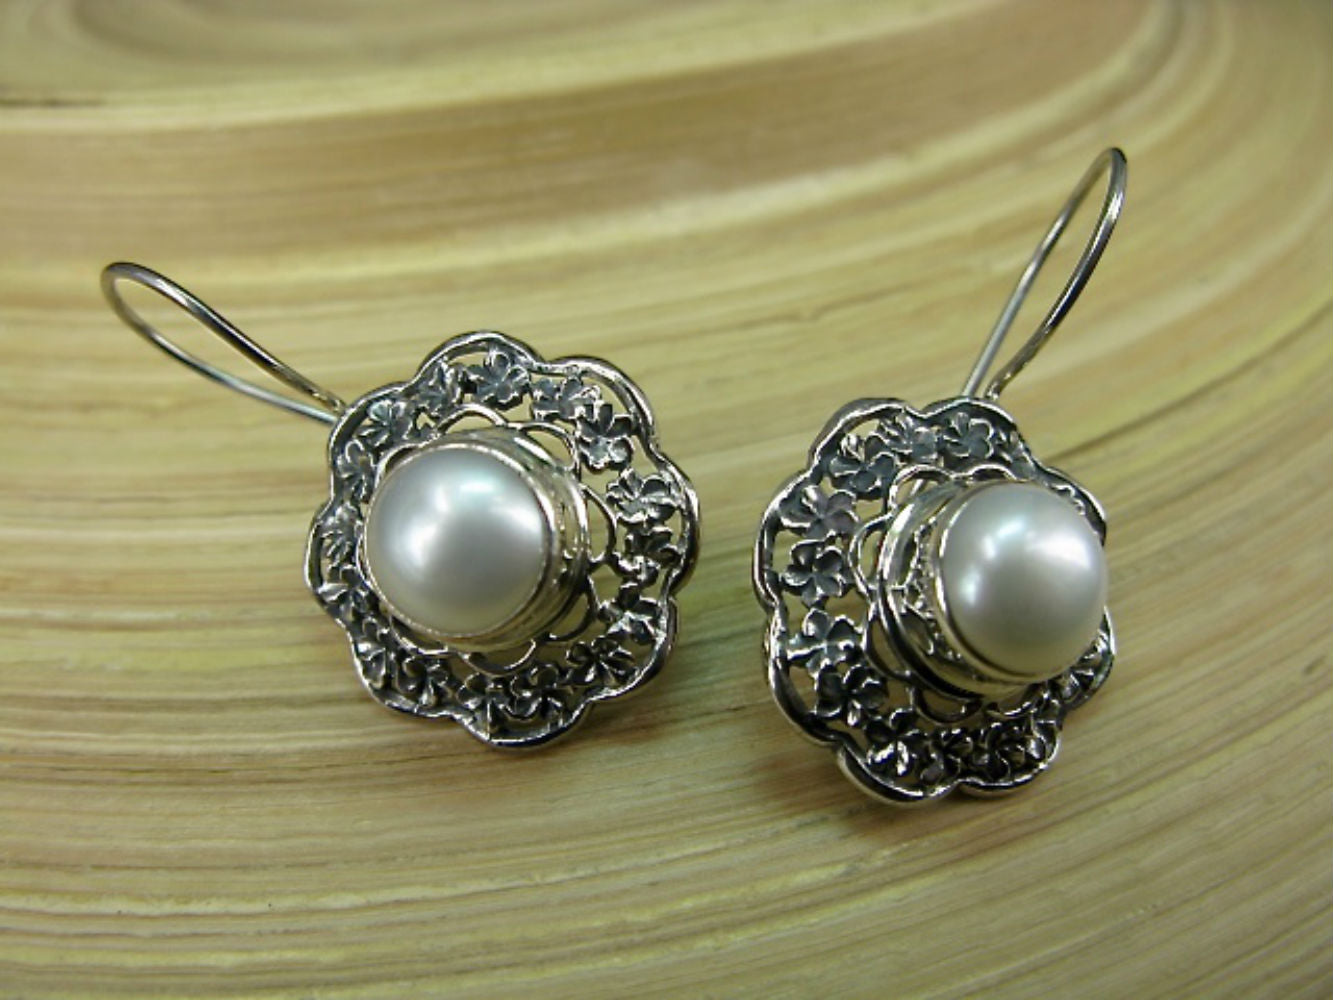 Filigree Flower Round Mother of Pearl 925 Sterling Silver Earrings